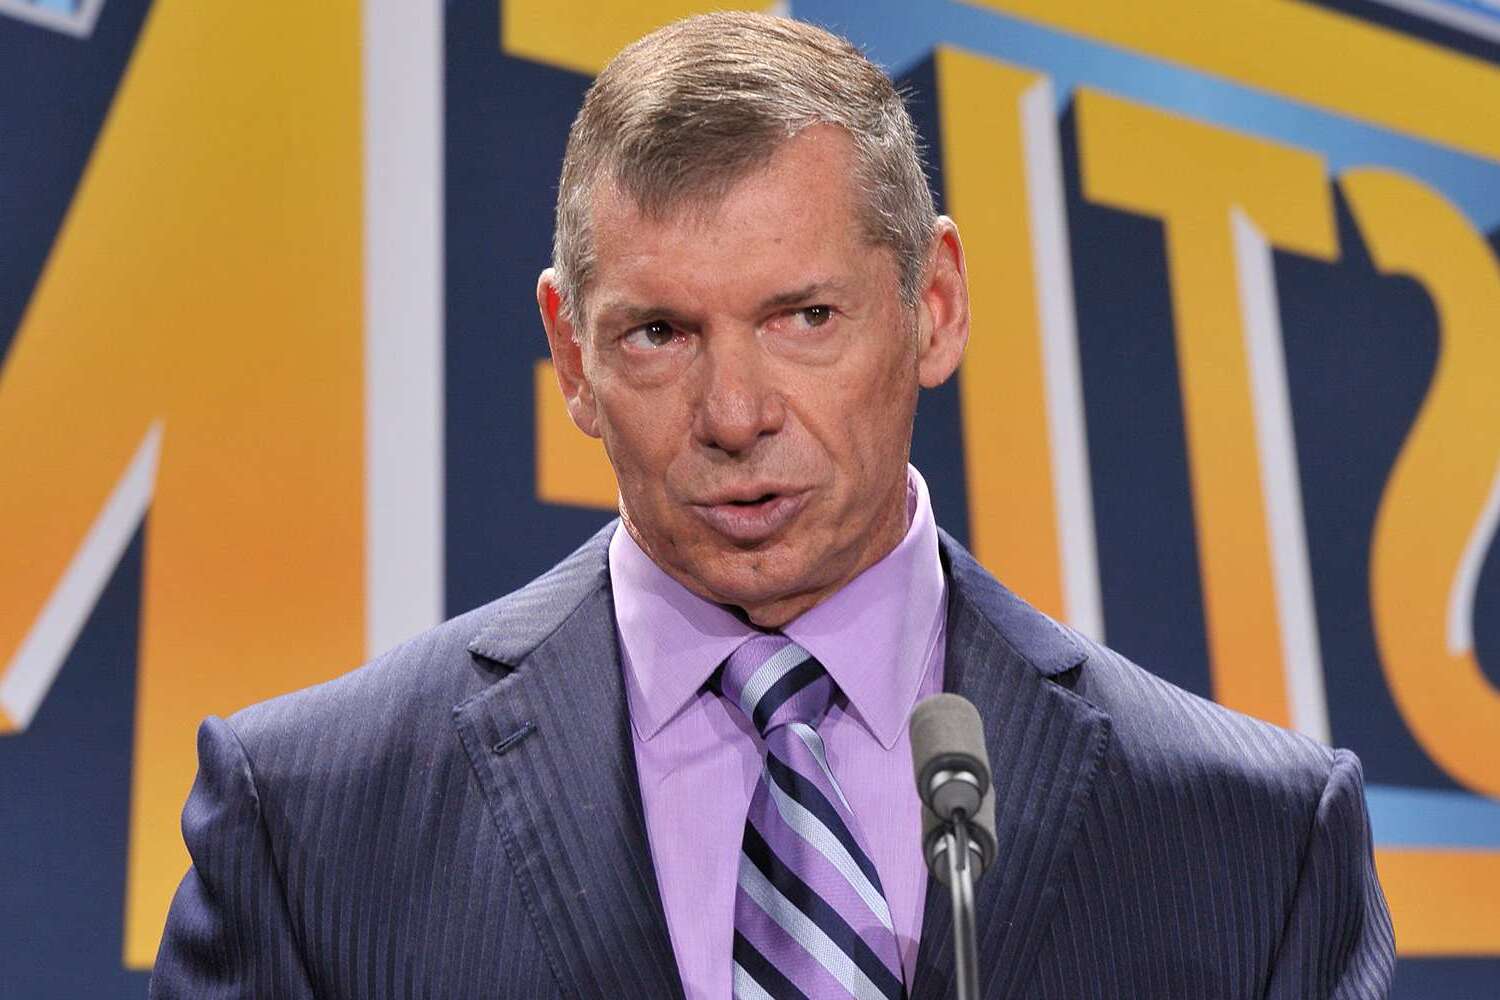 vince-mcmahon-sells-over-400-million-worth-of-tko-stock-amid-wwe-scandal